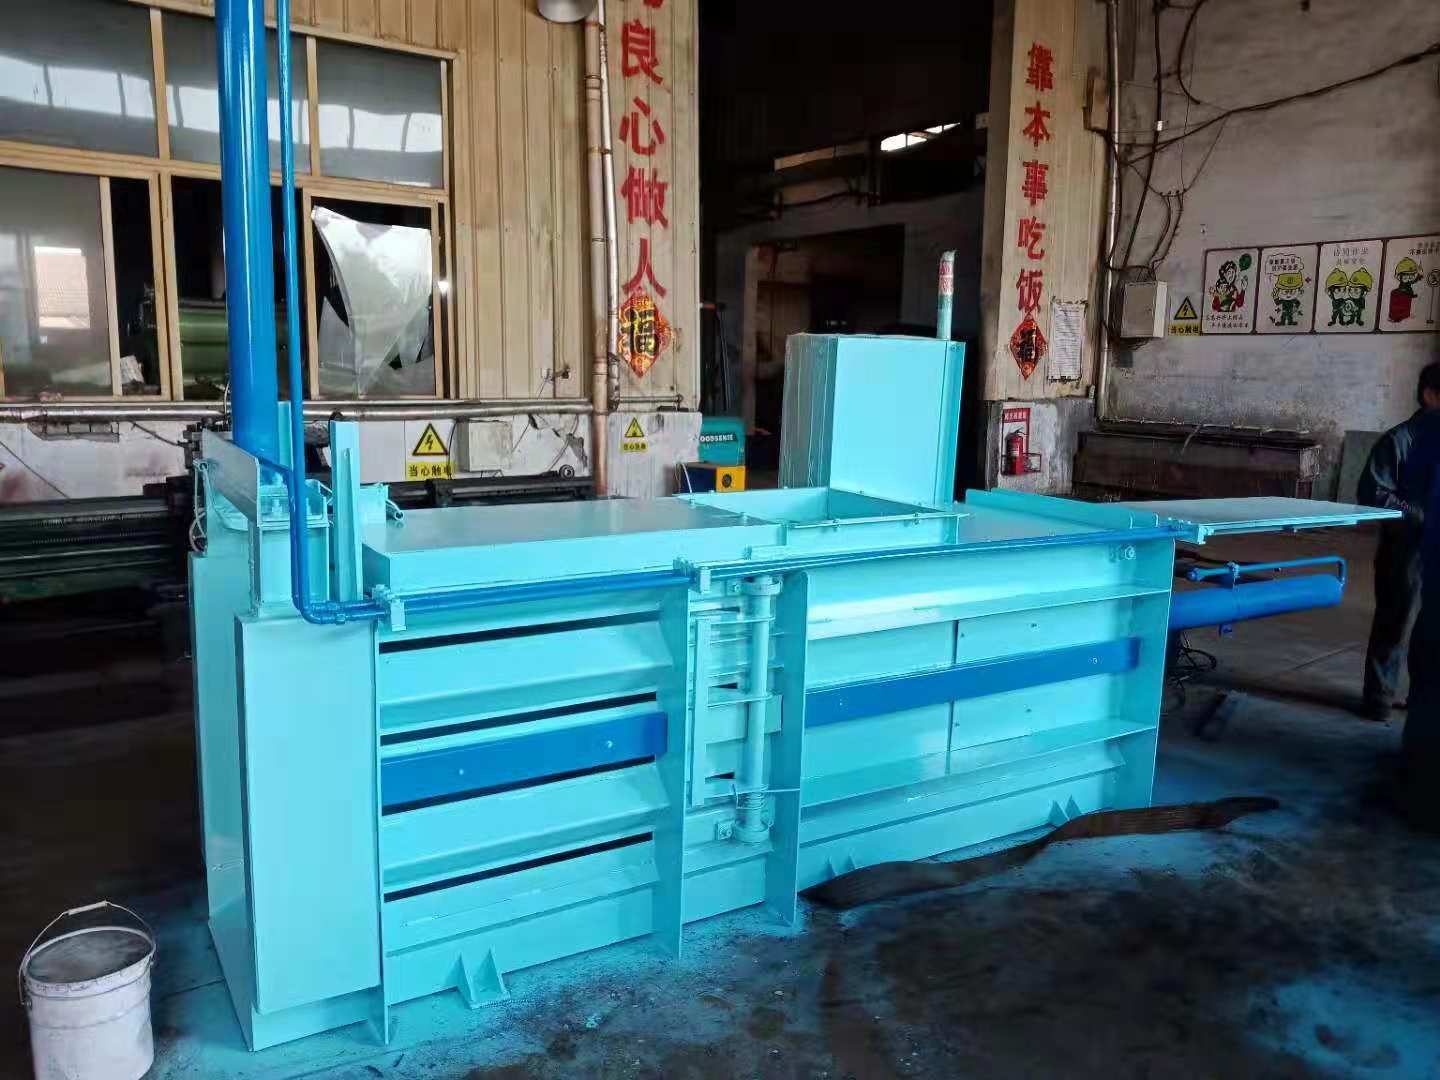 Factory Directly Selling Metal /Paper /Clothes /cardboard Horizontal baler machine with CE Certificate